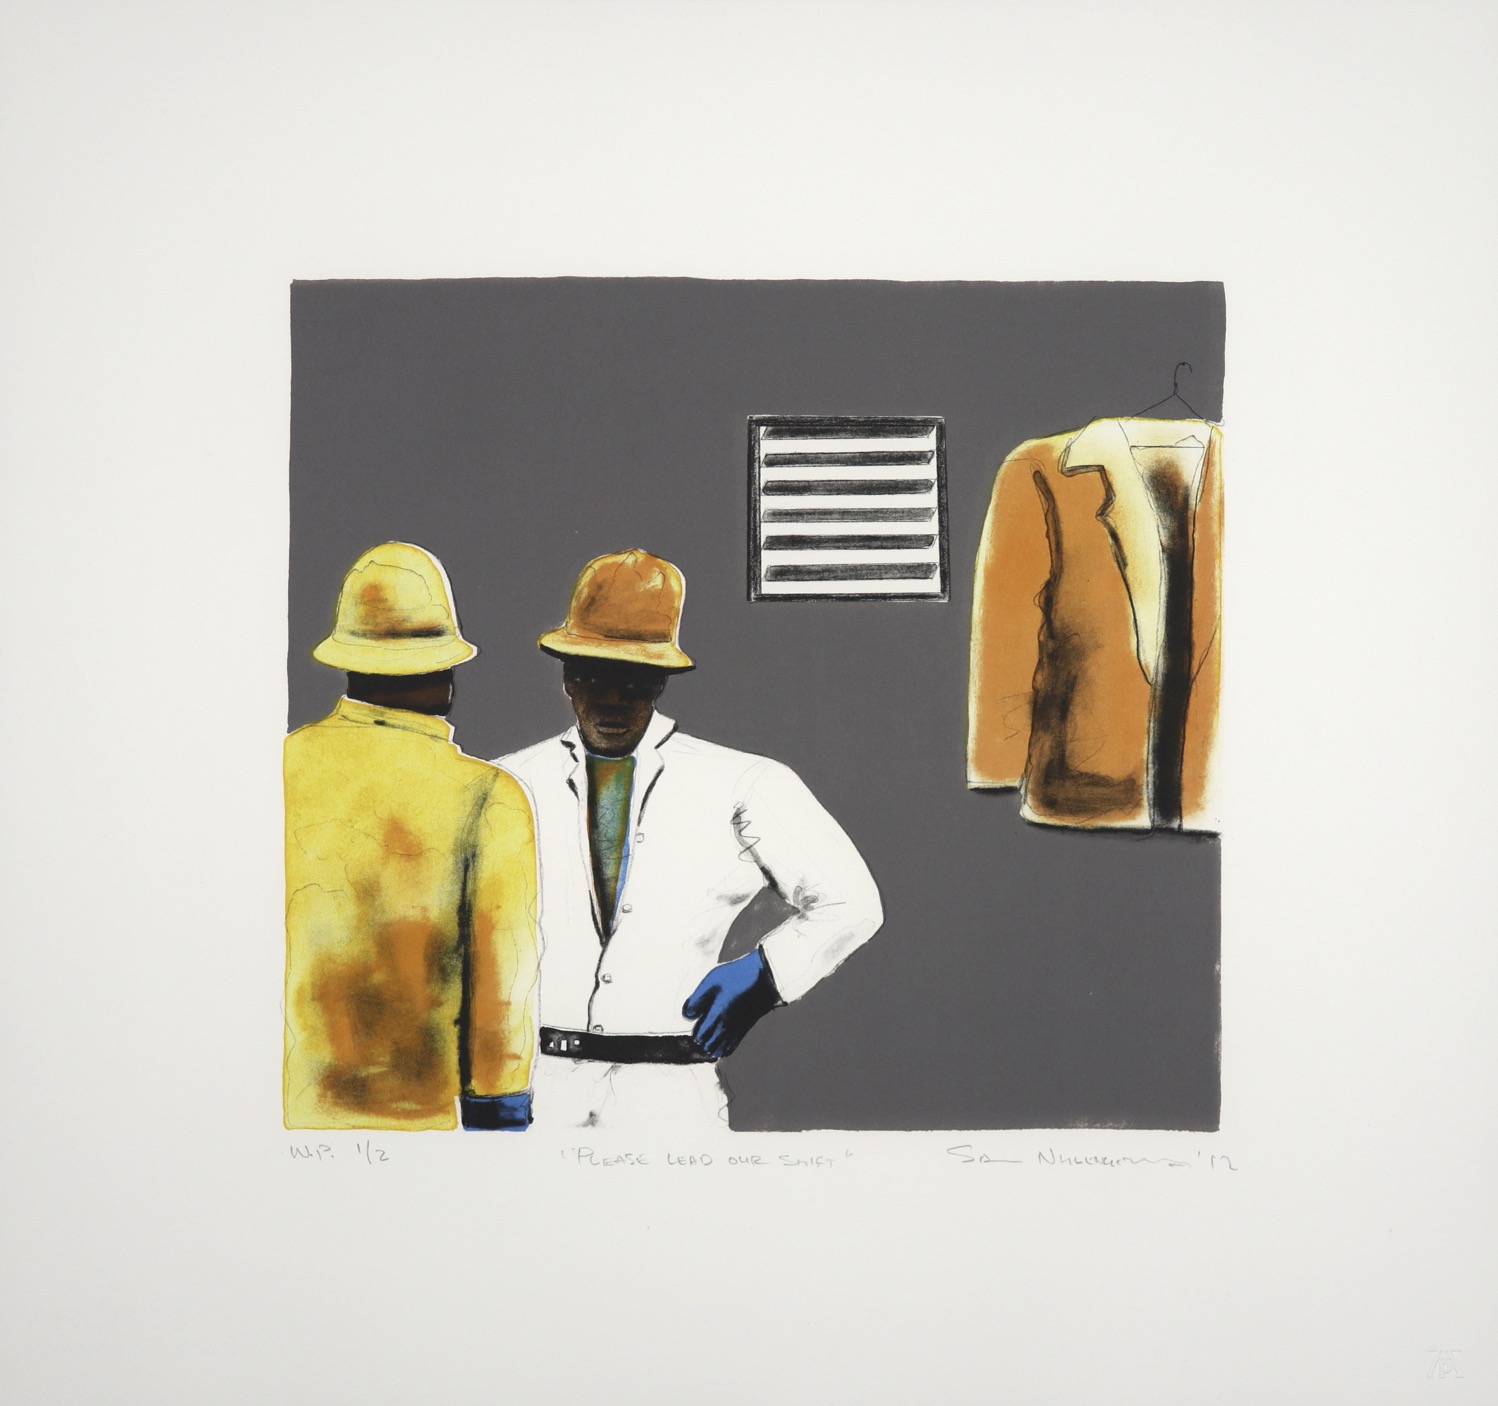 Two miners in overalls and hard hats talking to each other in grey walled room